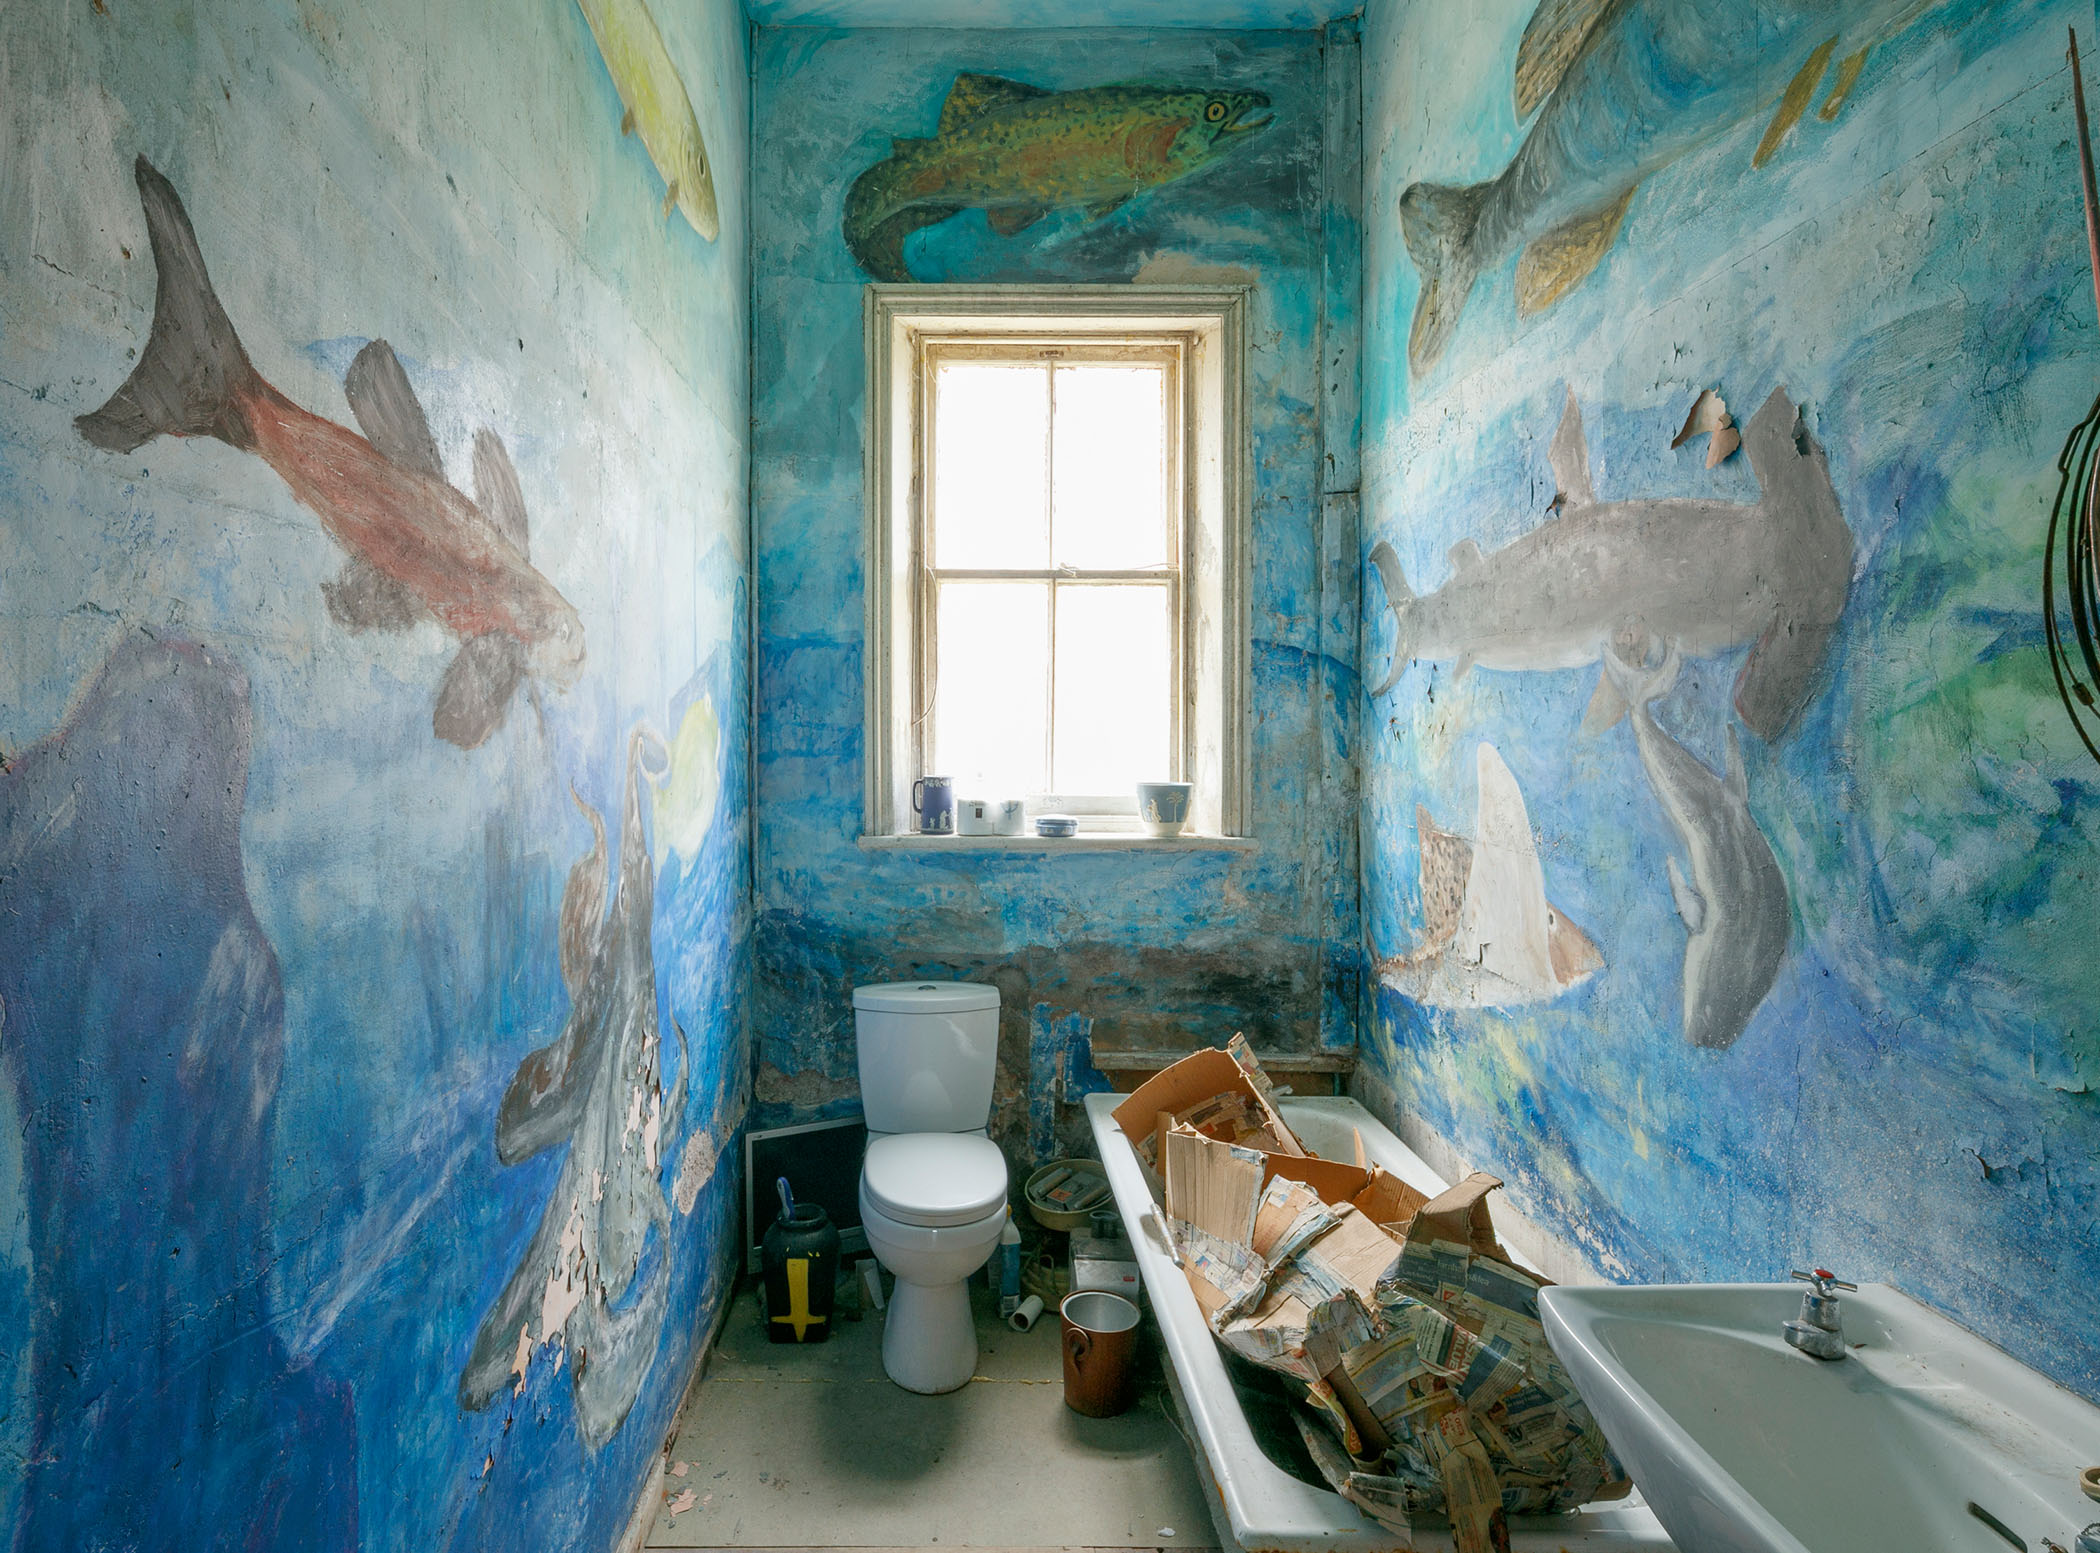 A photograph of a small bathroom with a window frame in the centre and walls painted with a mural of an underwater scene containing fish, a hammerhead shark and other sea life.